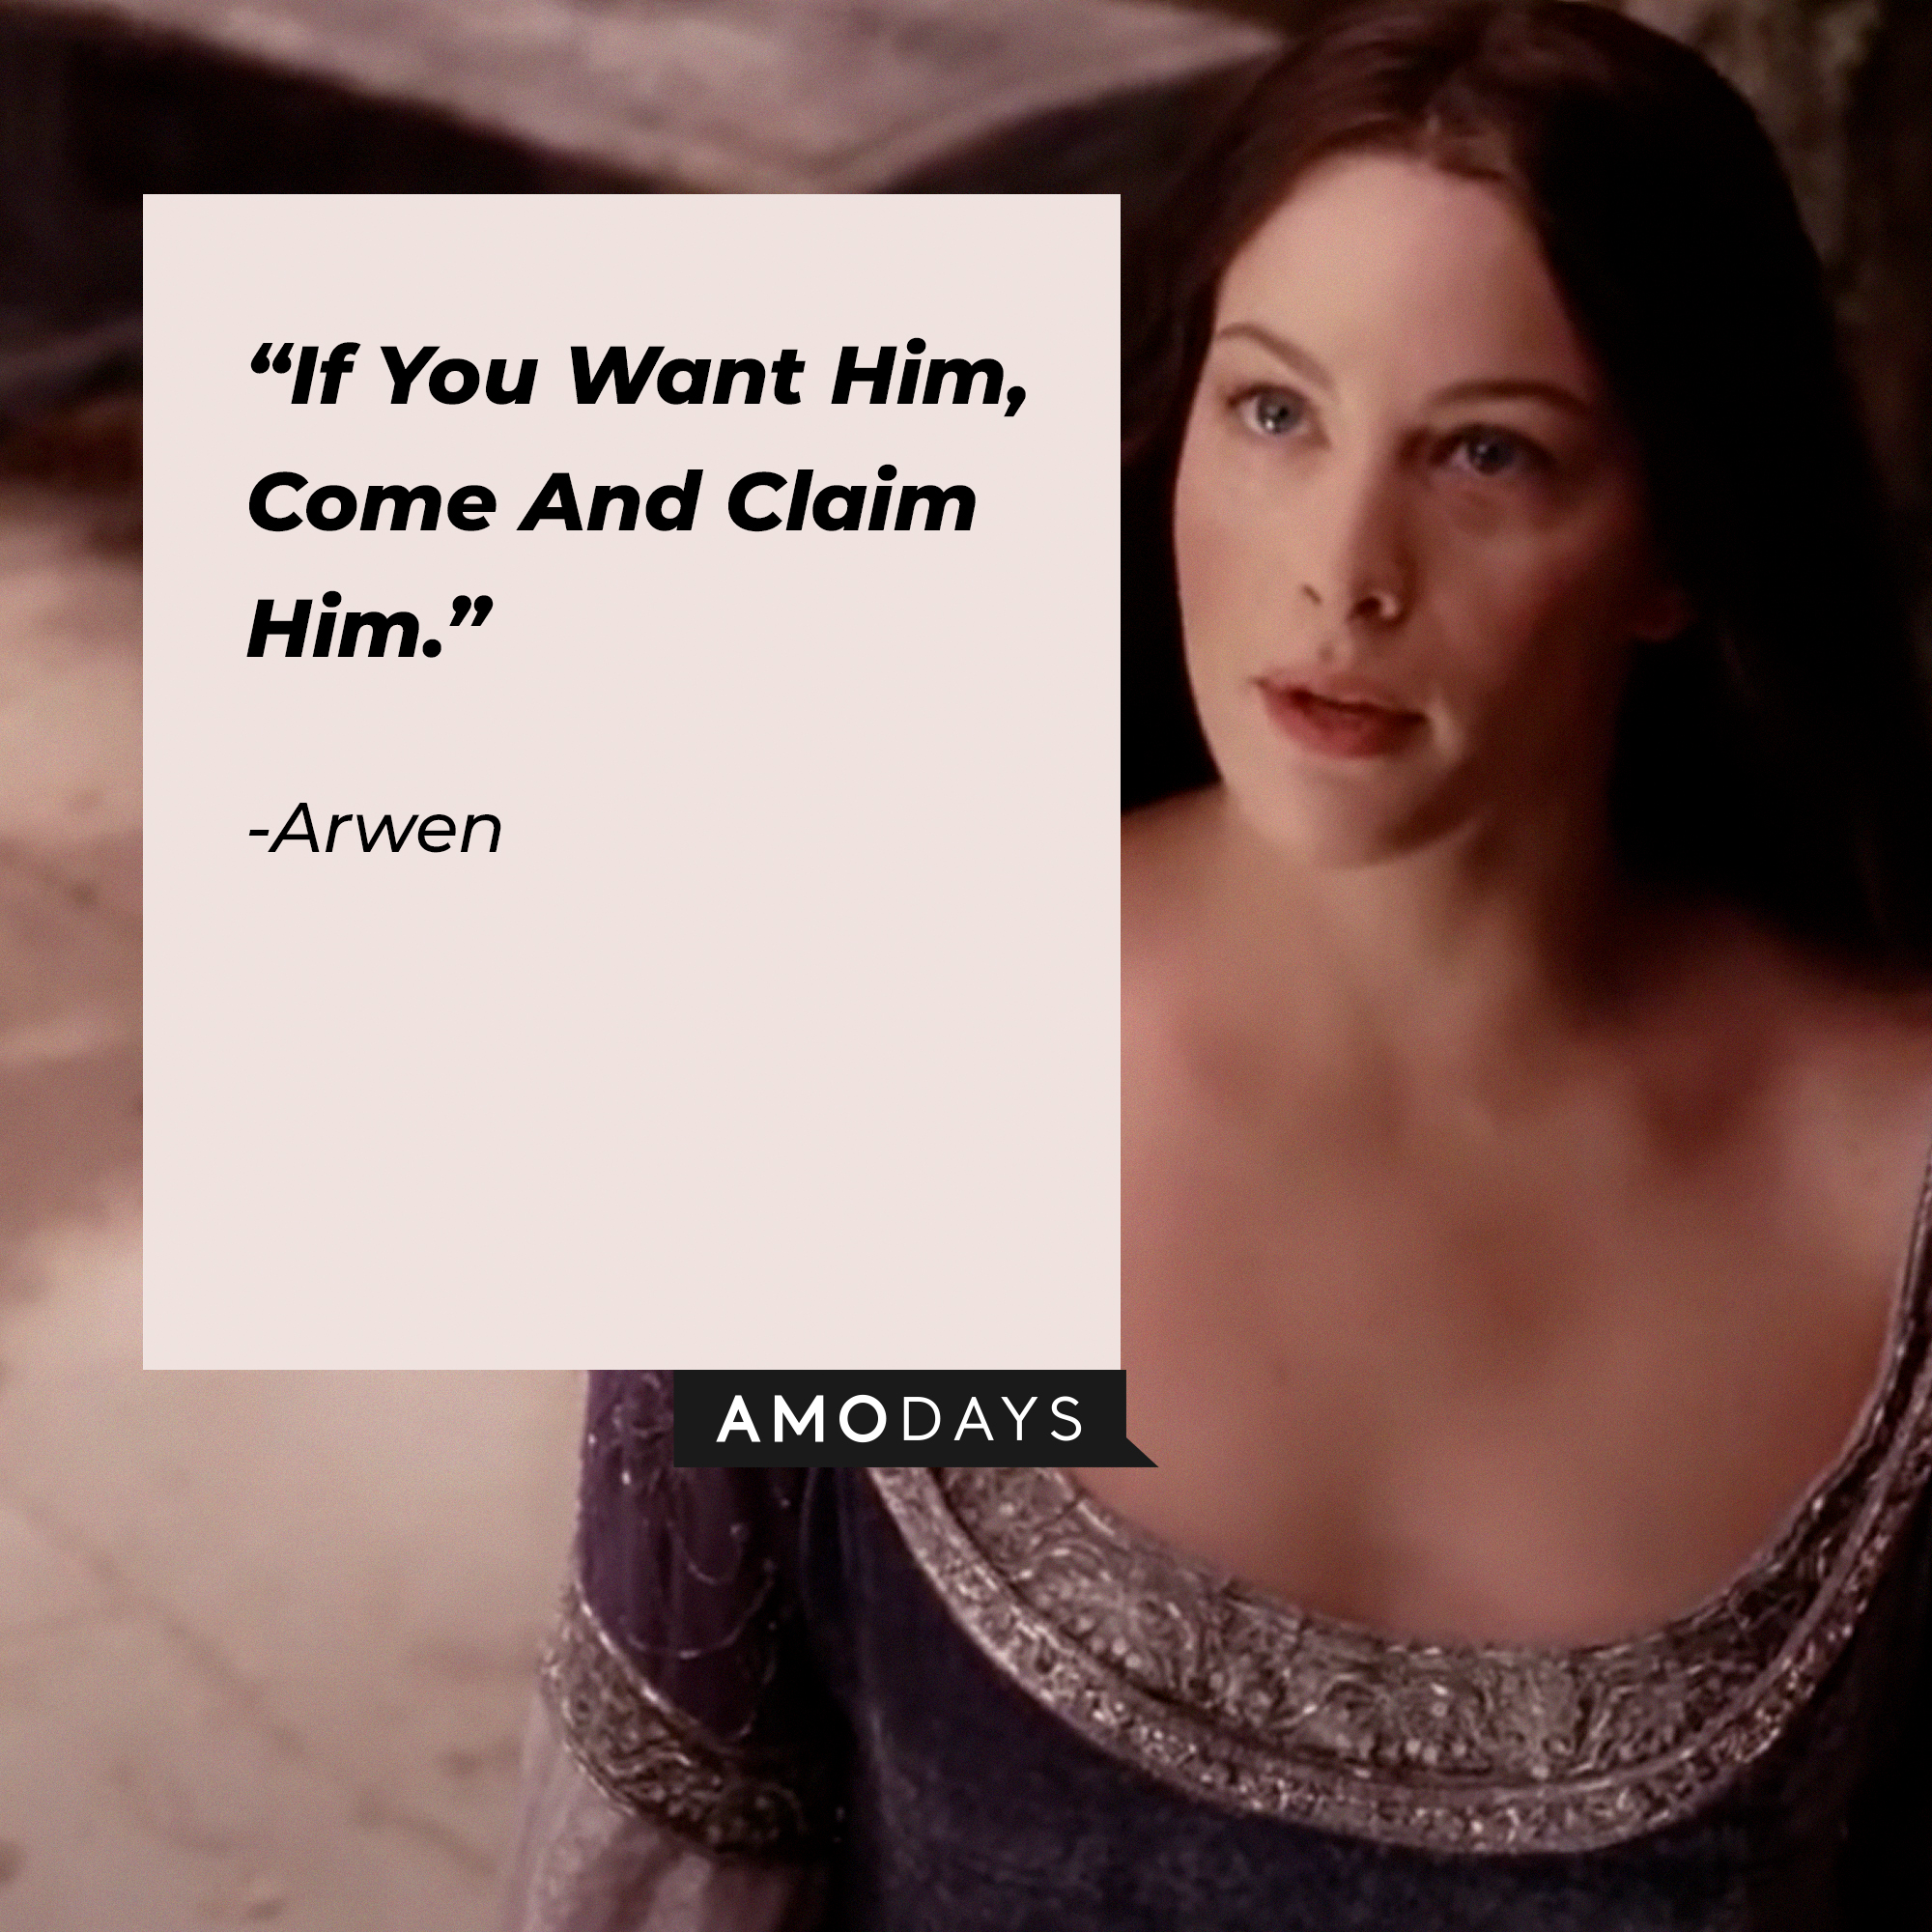 Arwen's quote : "If You Want Him, Come And Claim Him." | Source: facebook.com/lordoftheringstrilogy